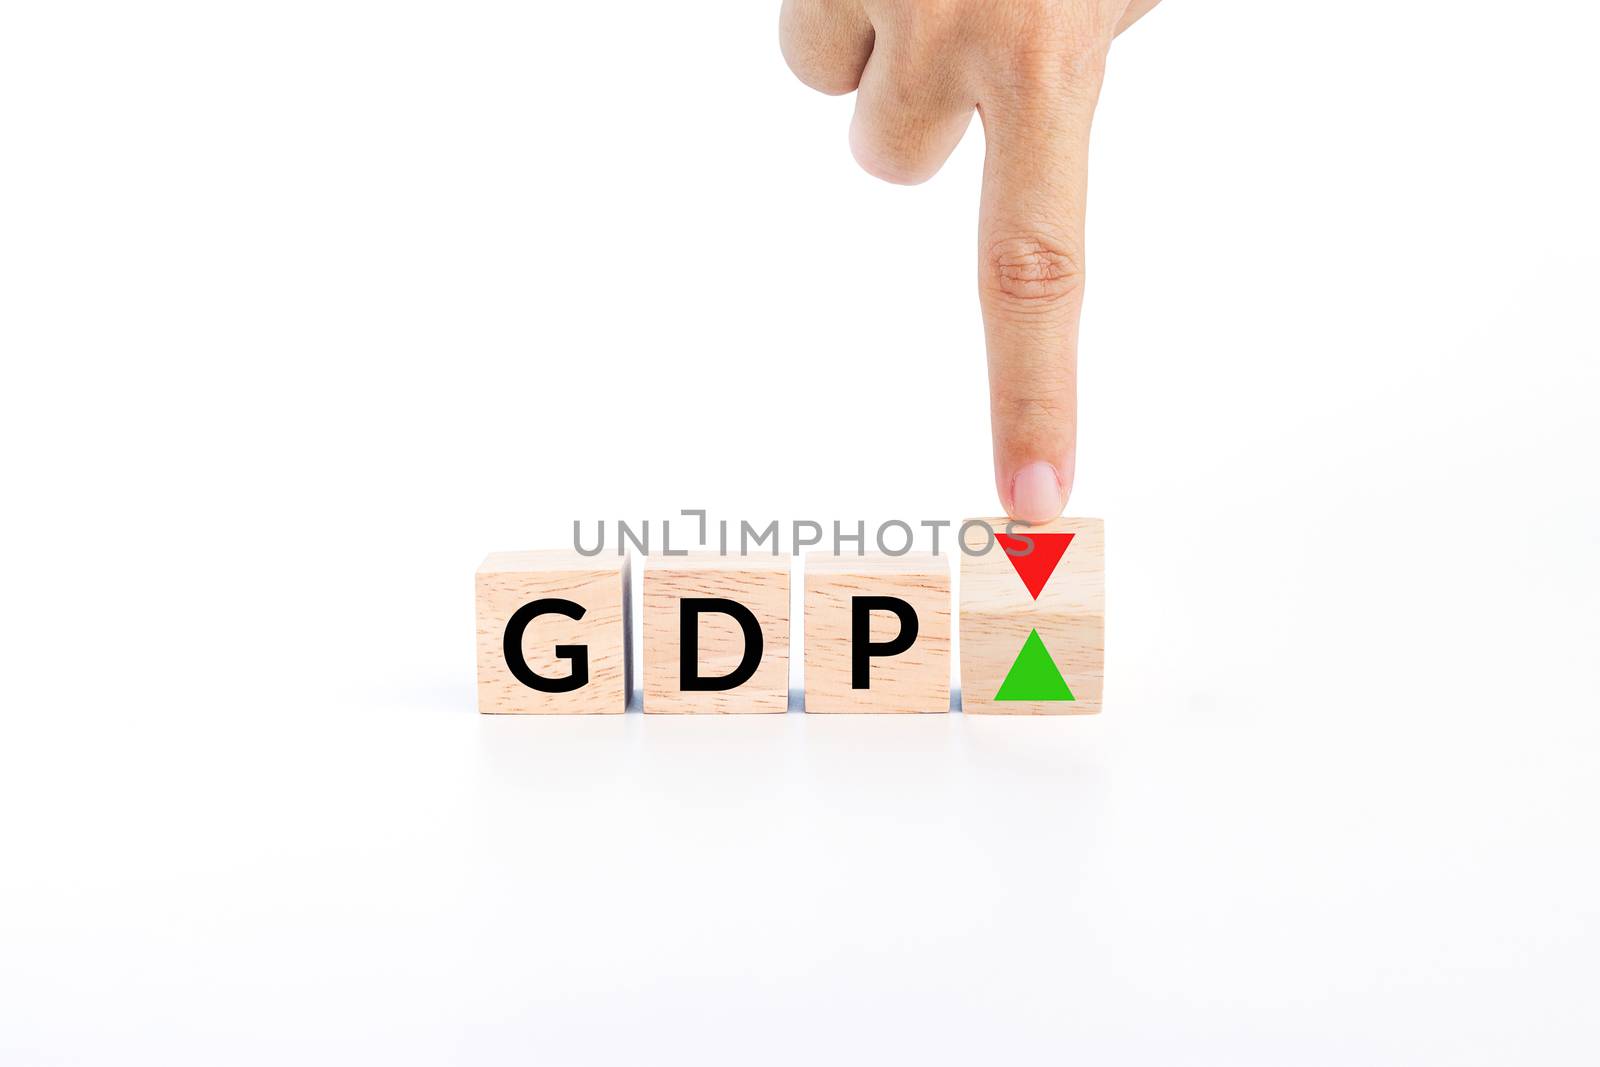 hand flip wooden cube to changes the direction of an arrow symbolizing that the GDP (gross domestic product) of a country is changing the trend and growth up instead of down